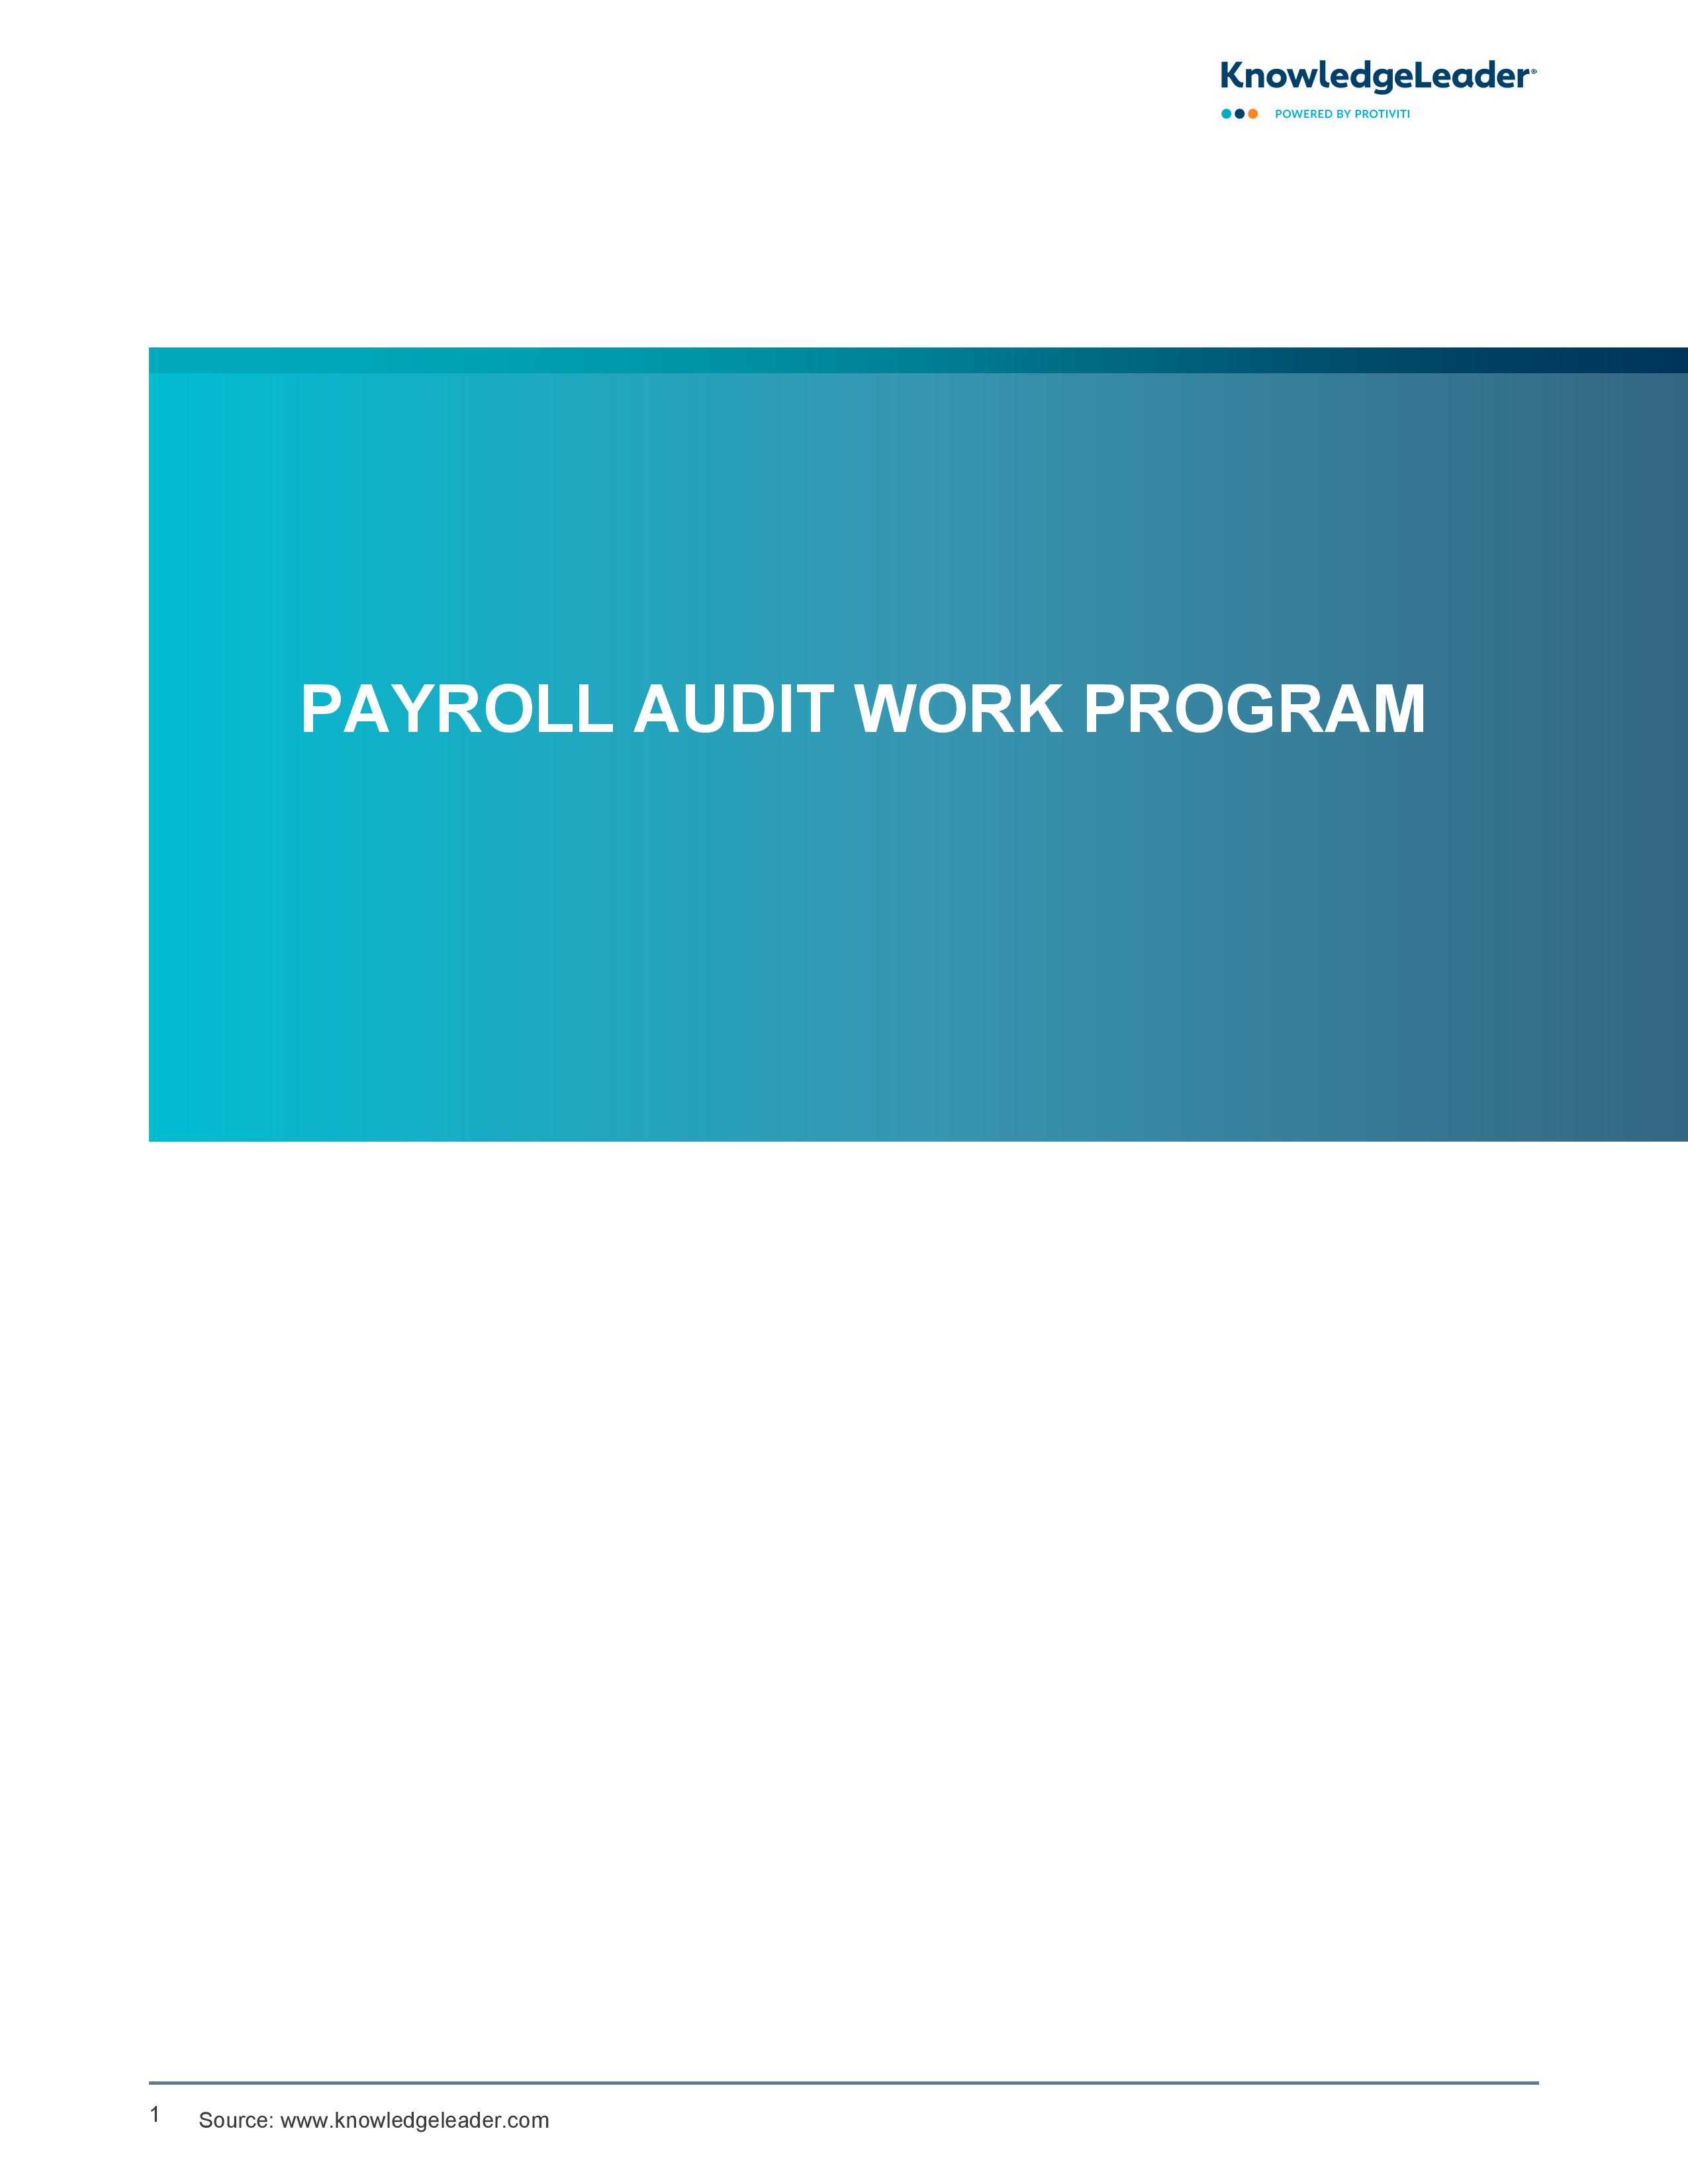 Screenshot of the first page of Payroll Audit Work Program